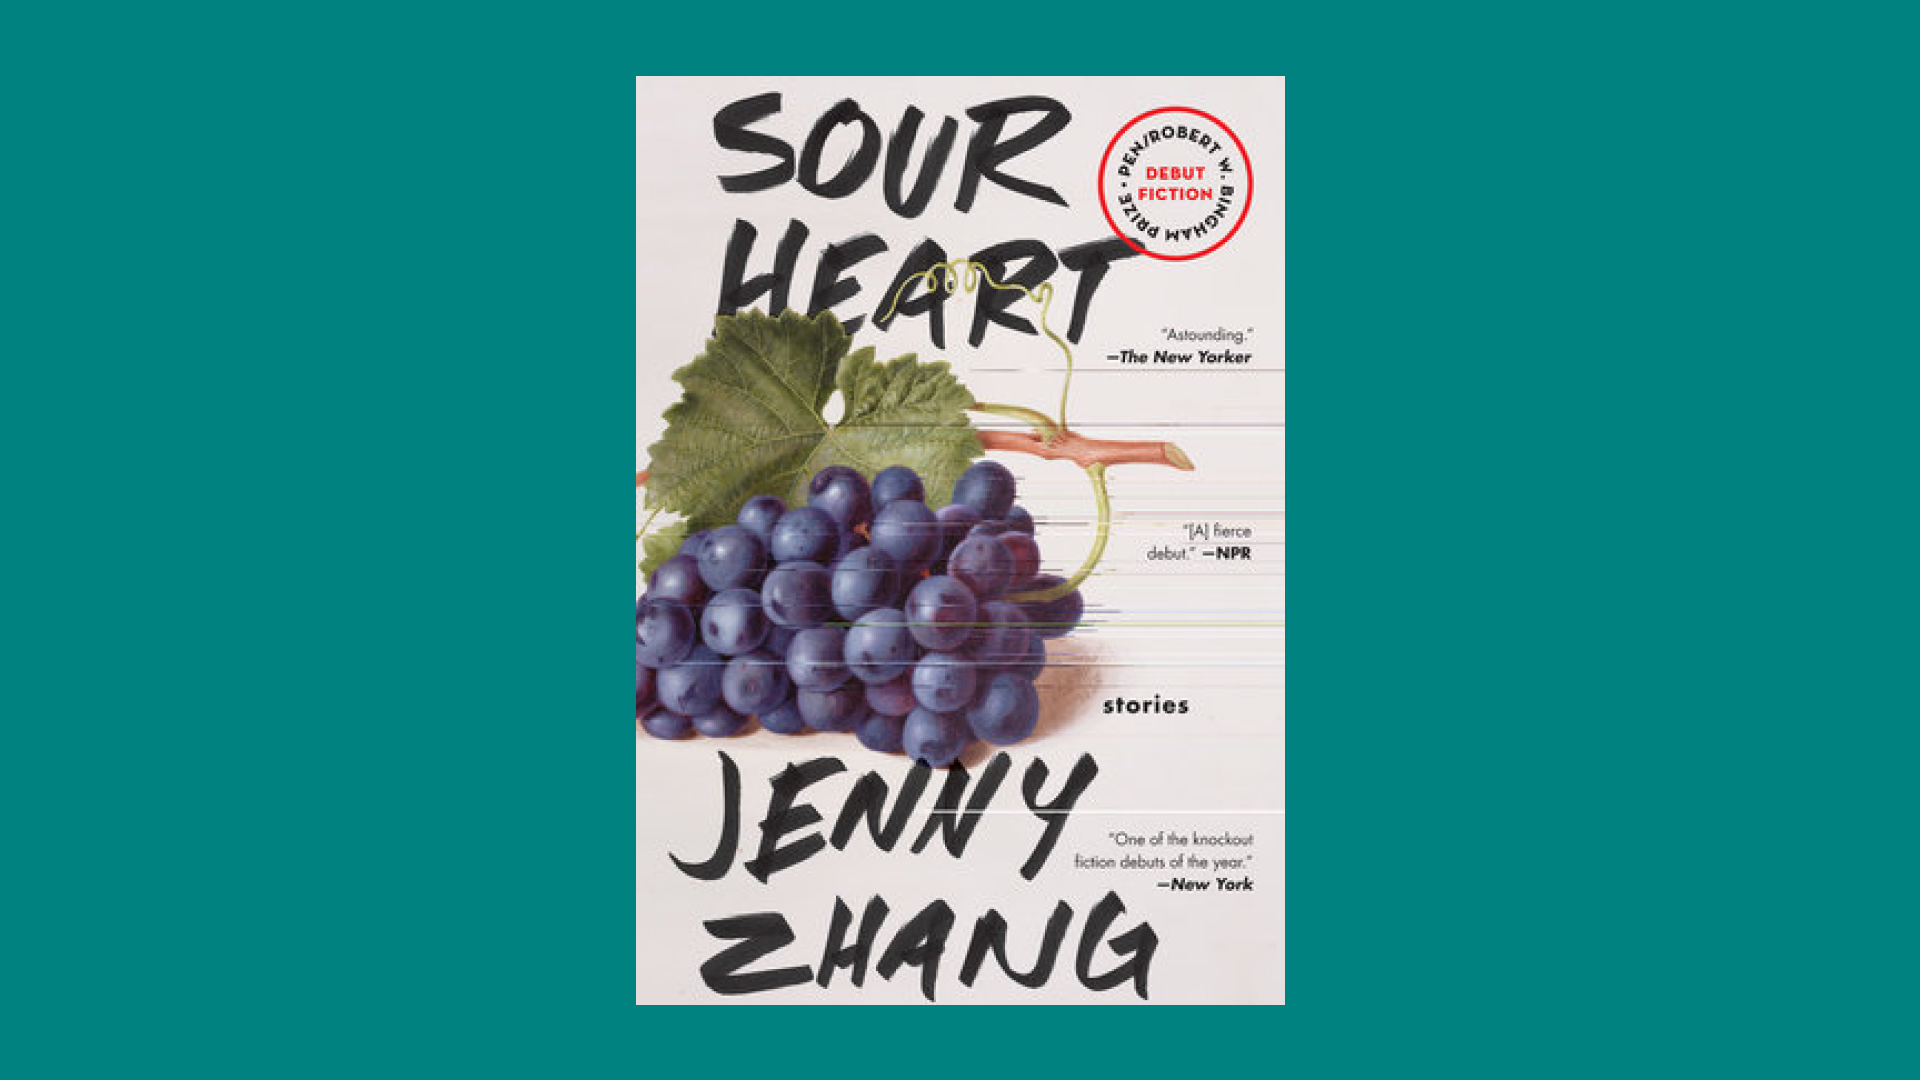 “Sour Heart” by Jenny Zhang